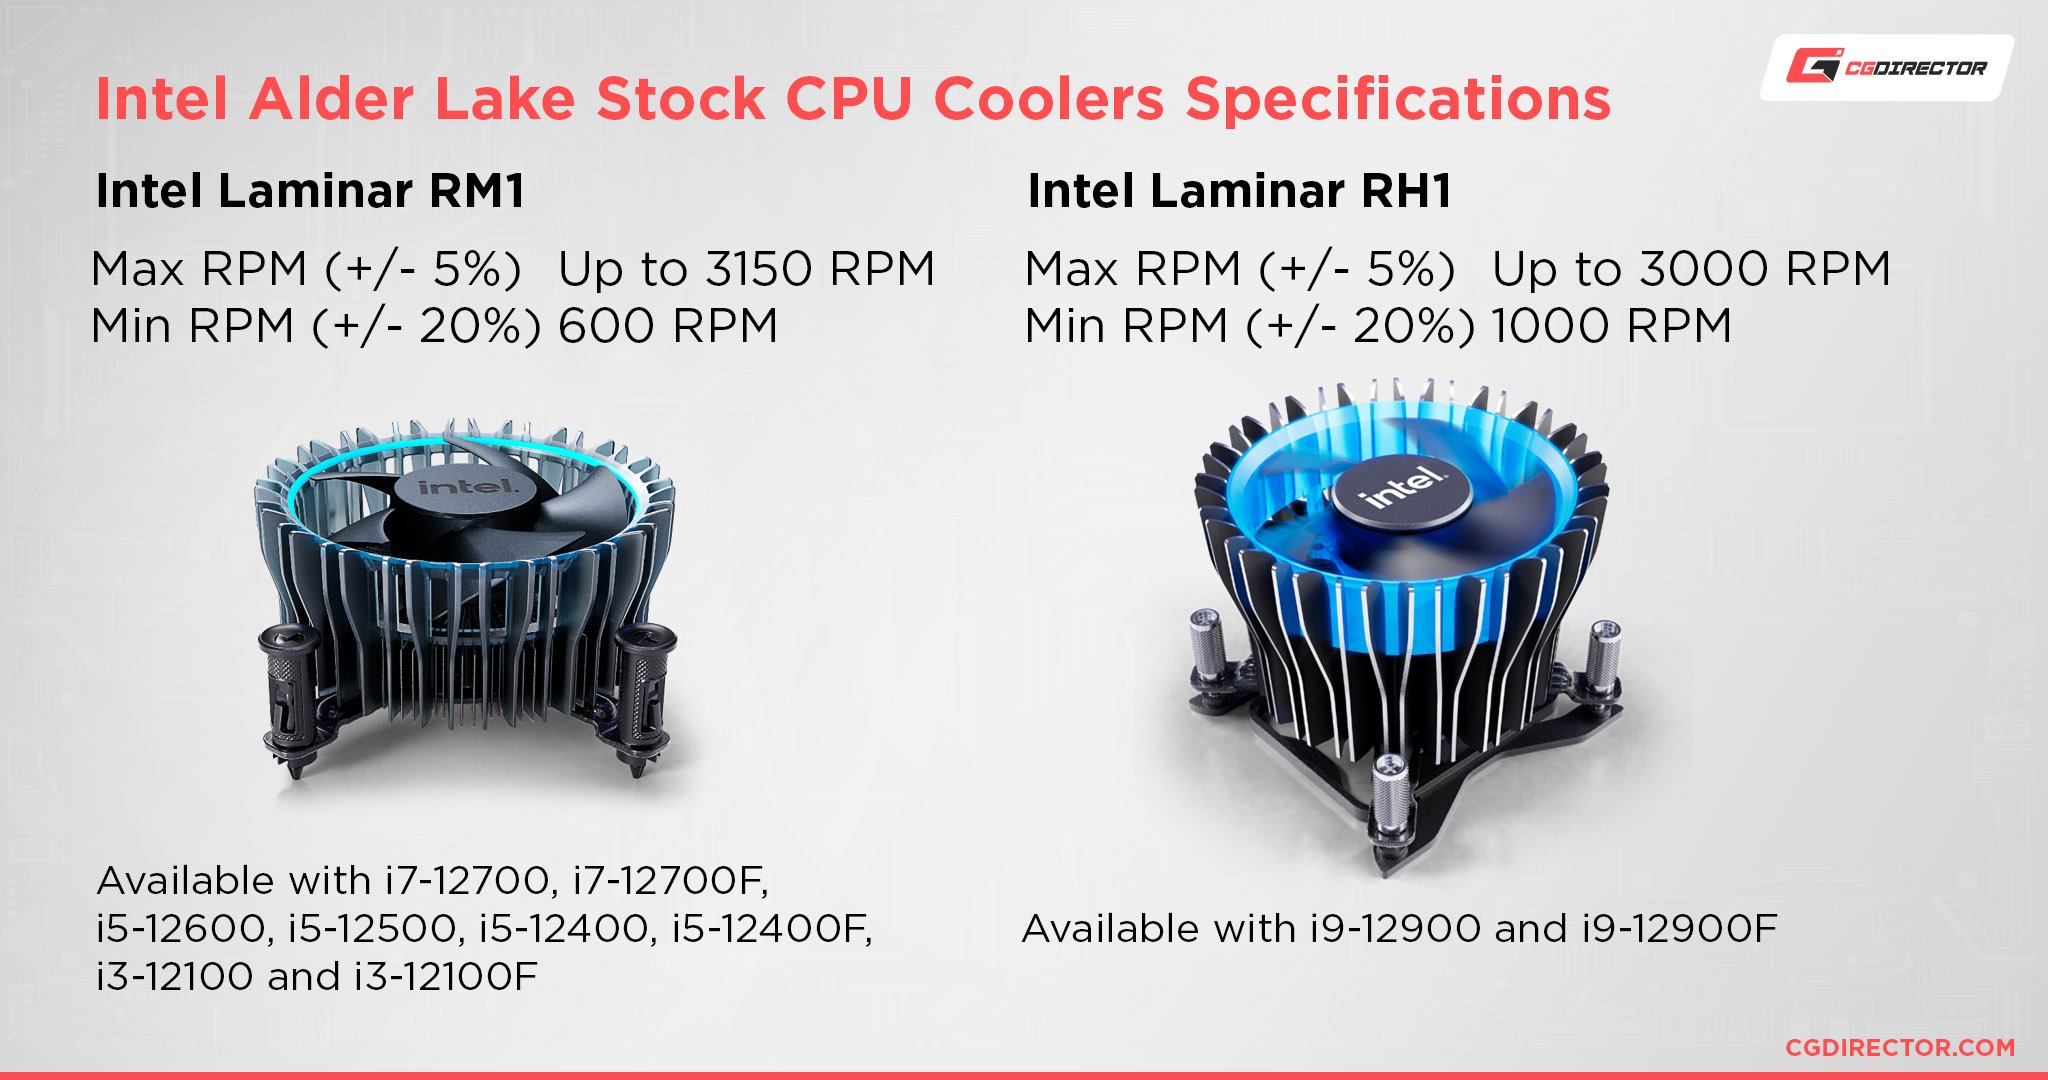 Intel Alder Lake Stock CPU Coolers Specifications